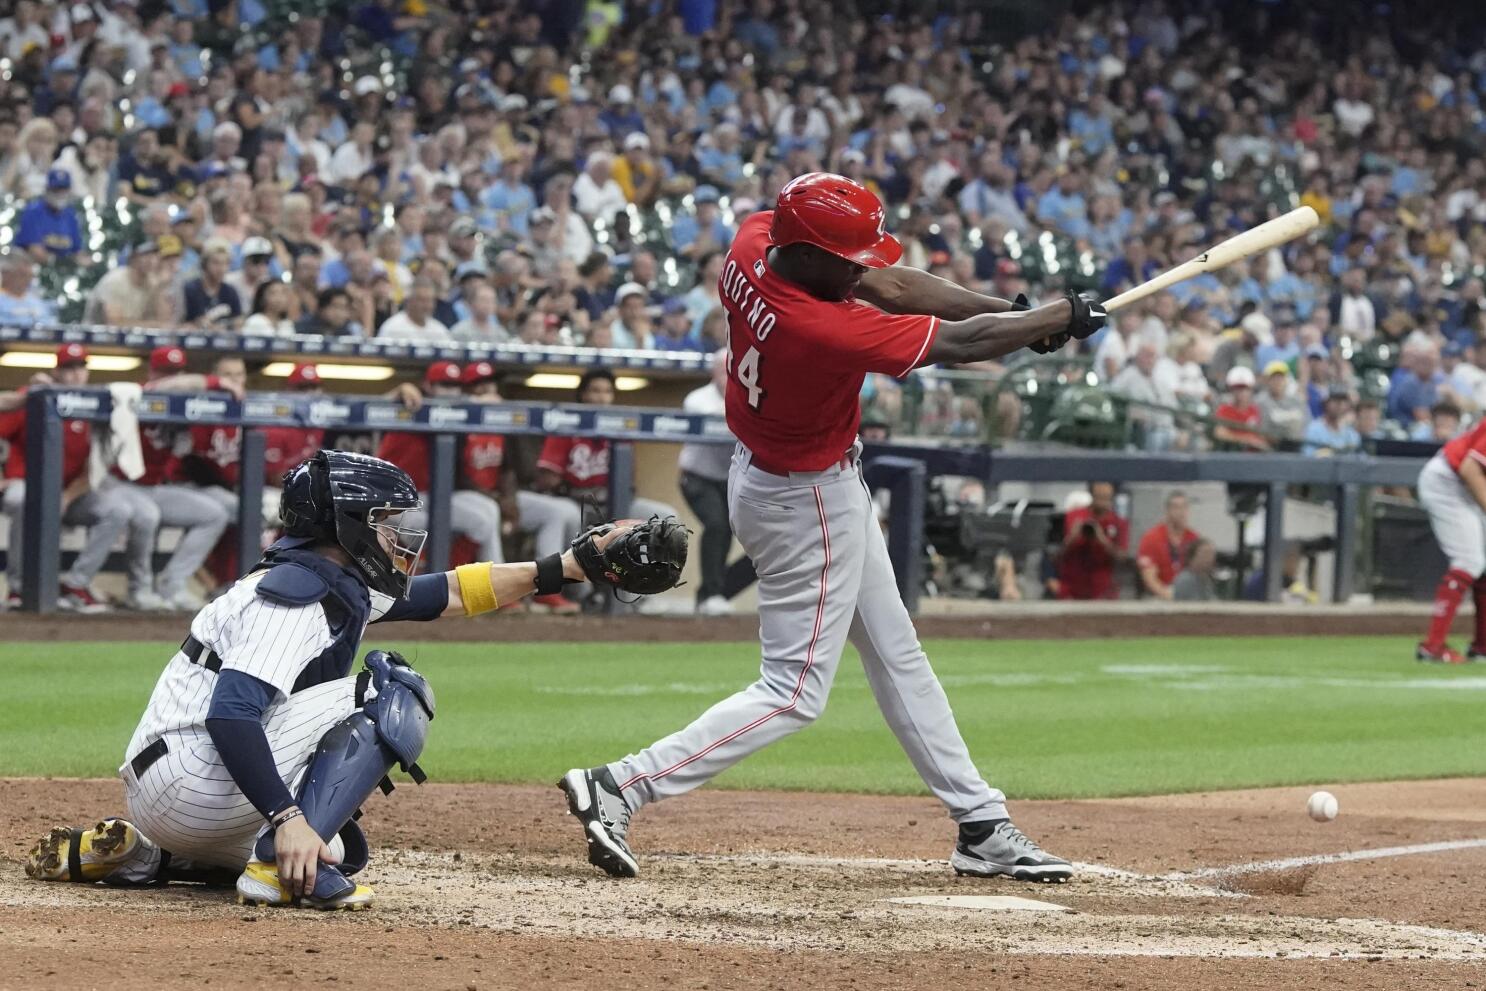 Images from the Brewers' 4-2 loss to the Braves